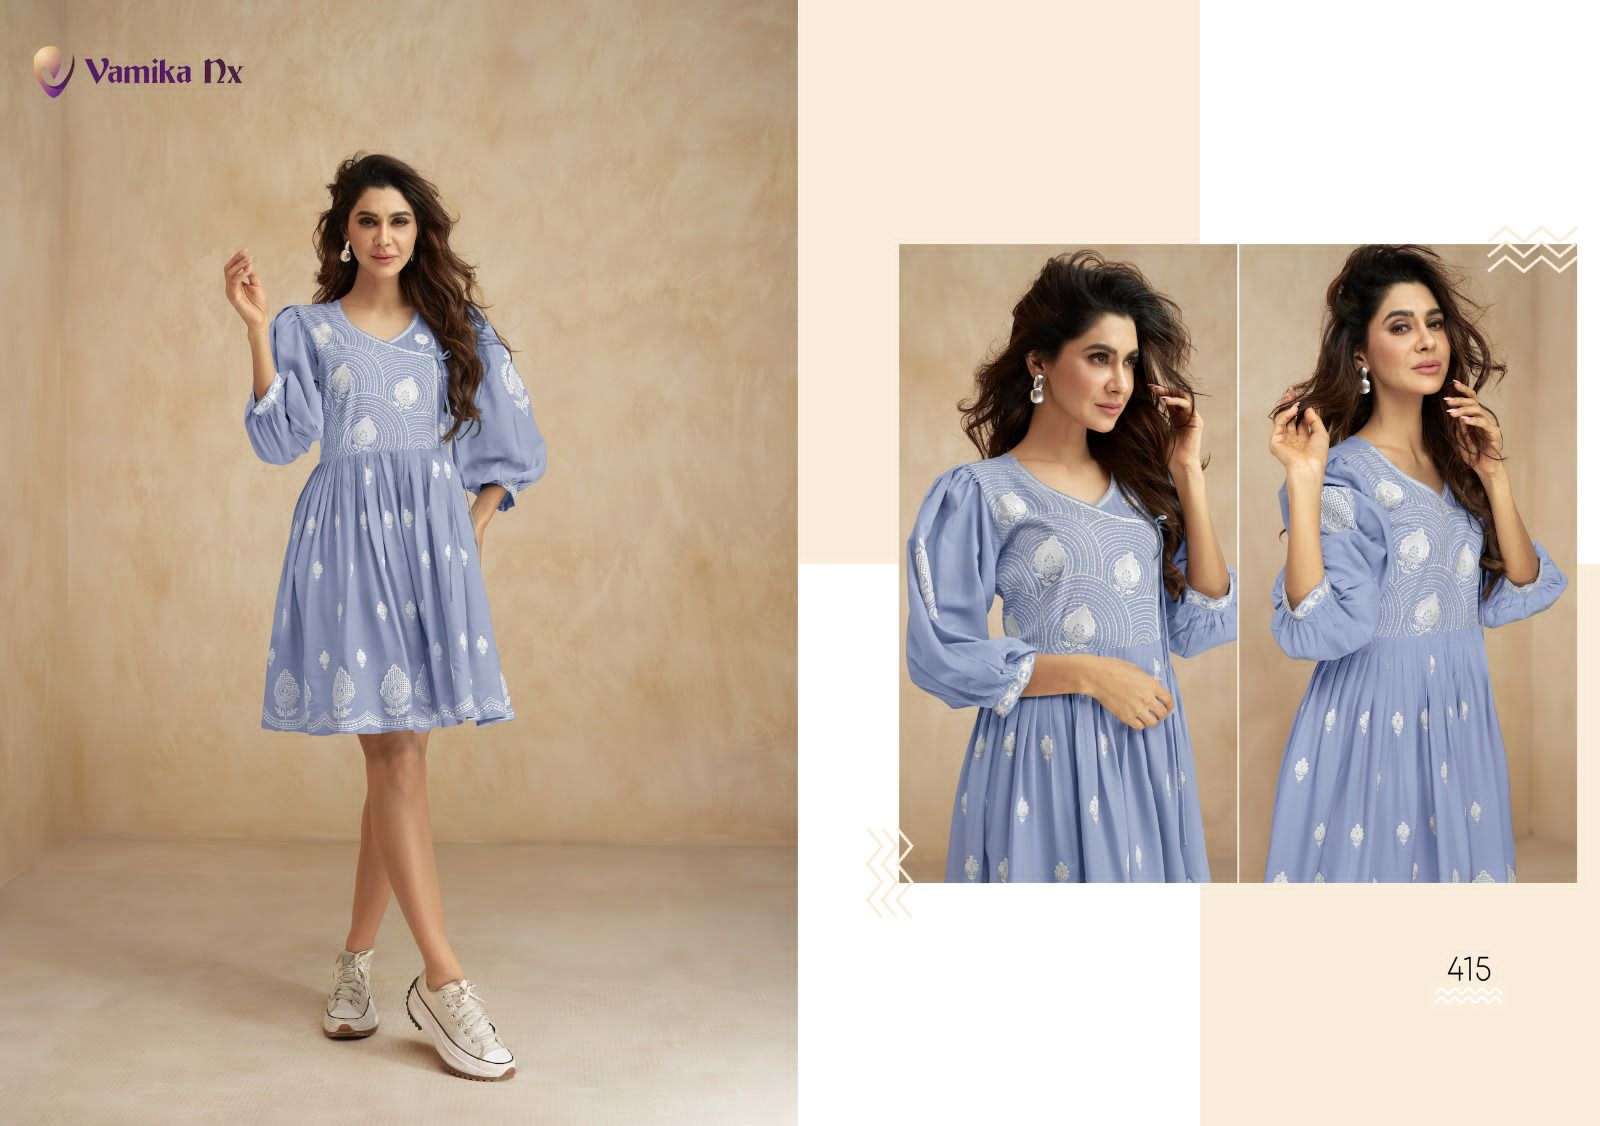 Vamika%20Fashion%20Ibadat%20Rayon%20with%20fancy%20TUnic%20Style%20Kurti%20collection%20at%20best%20rate%20(2) 1 2023 10 19 12 44 11